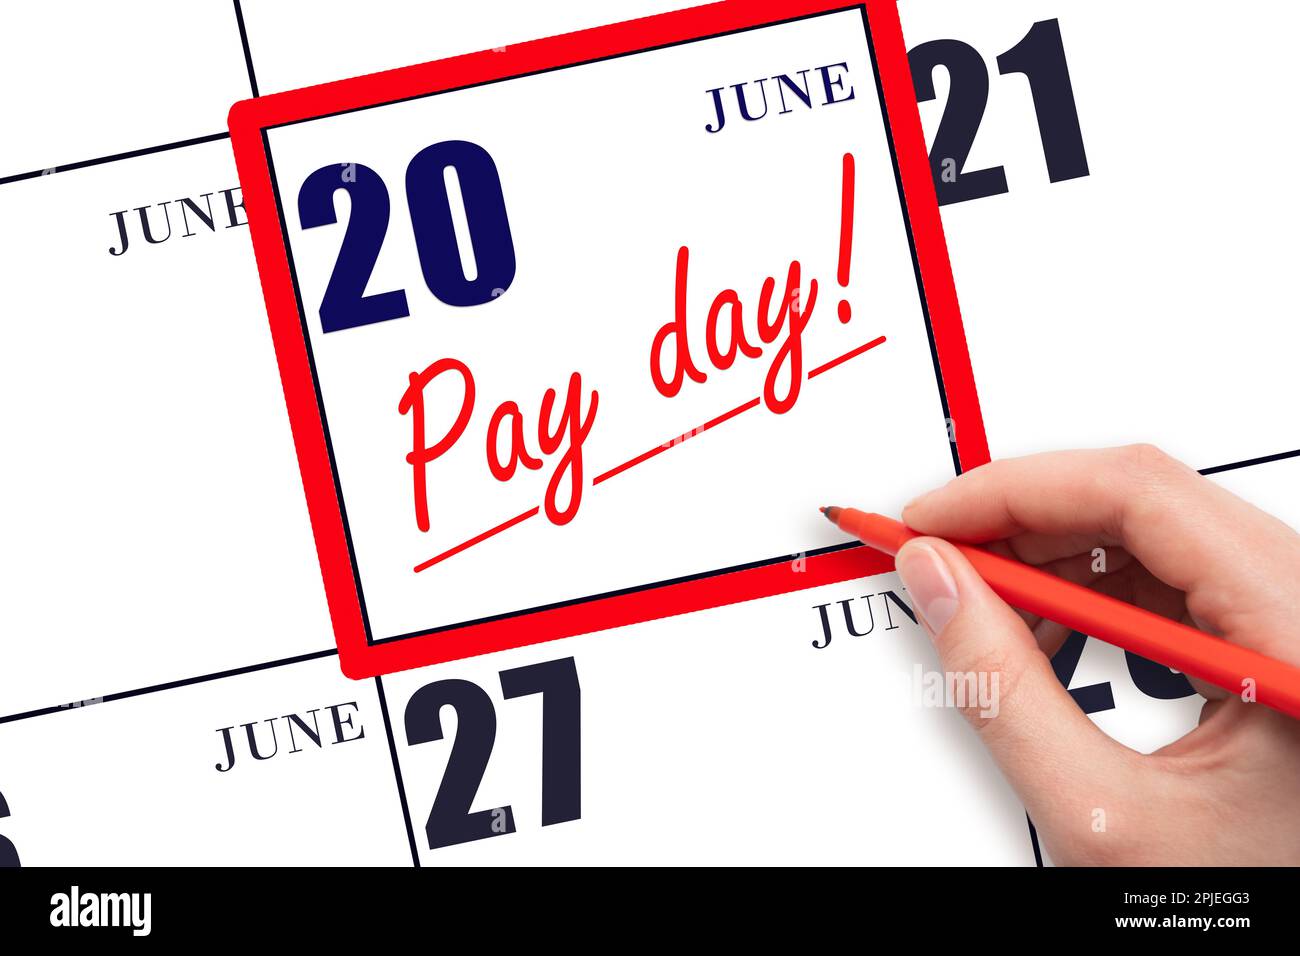 20th day of June. Hand writing text PAY DATE on calendar date June 20 and underline it. Payment due date.  Reminder concept of payment. Summer month, Stock Photo